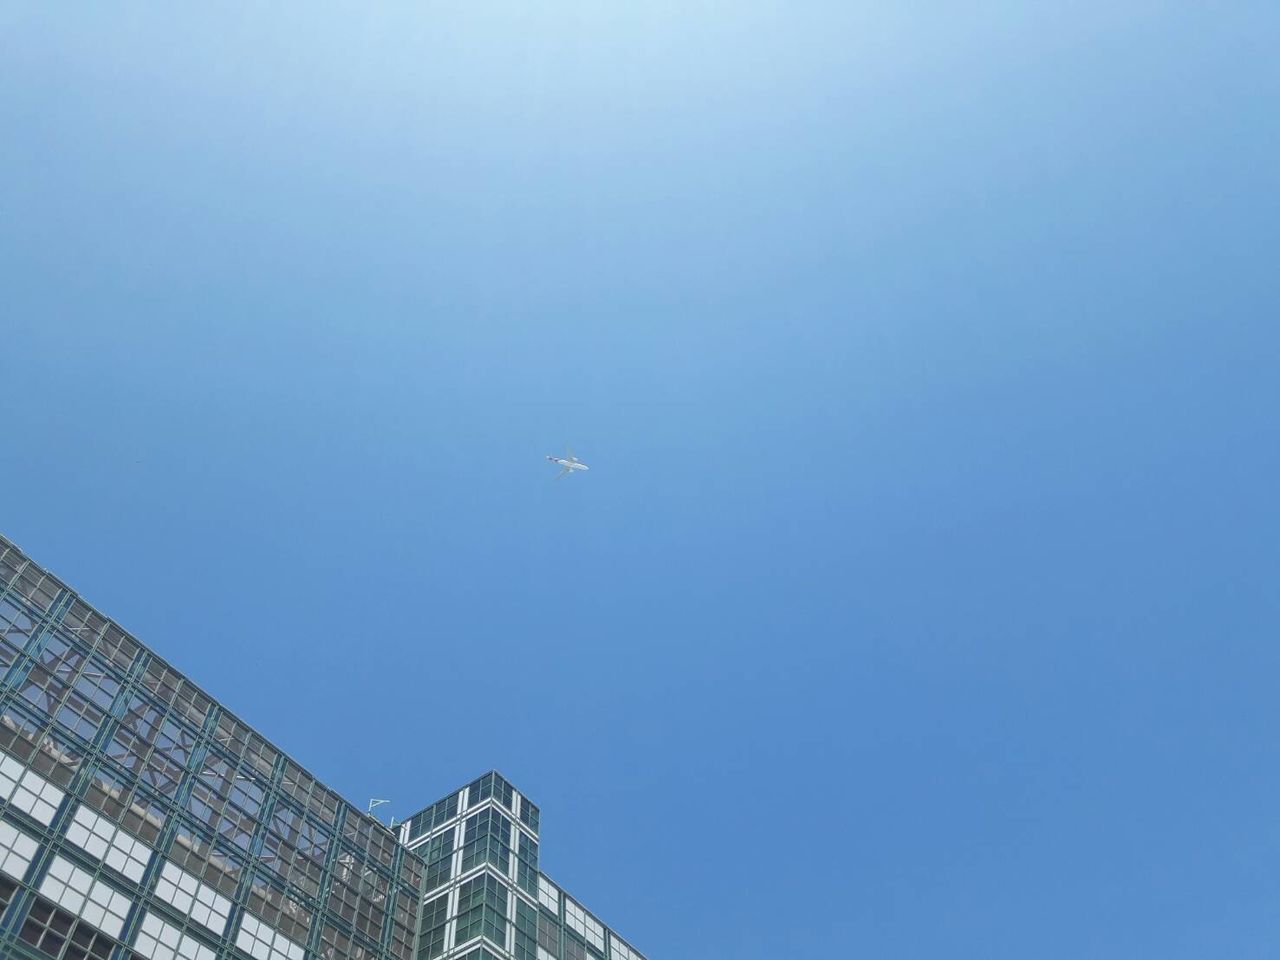 LOW ANGLE VIEW OF AIRPLANE AGAINST BLUE SKY